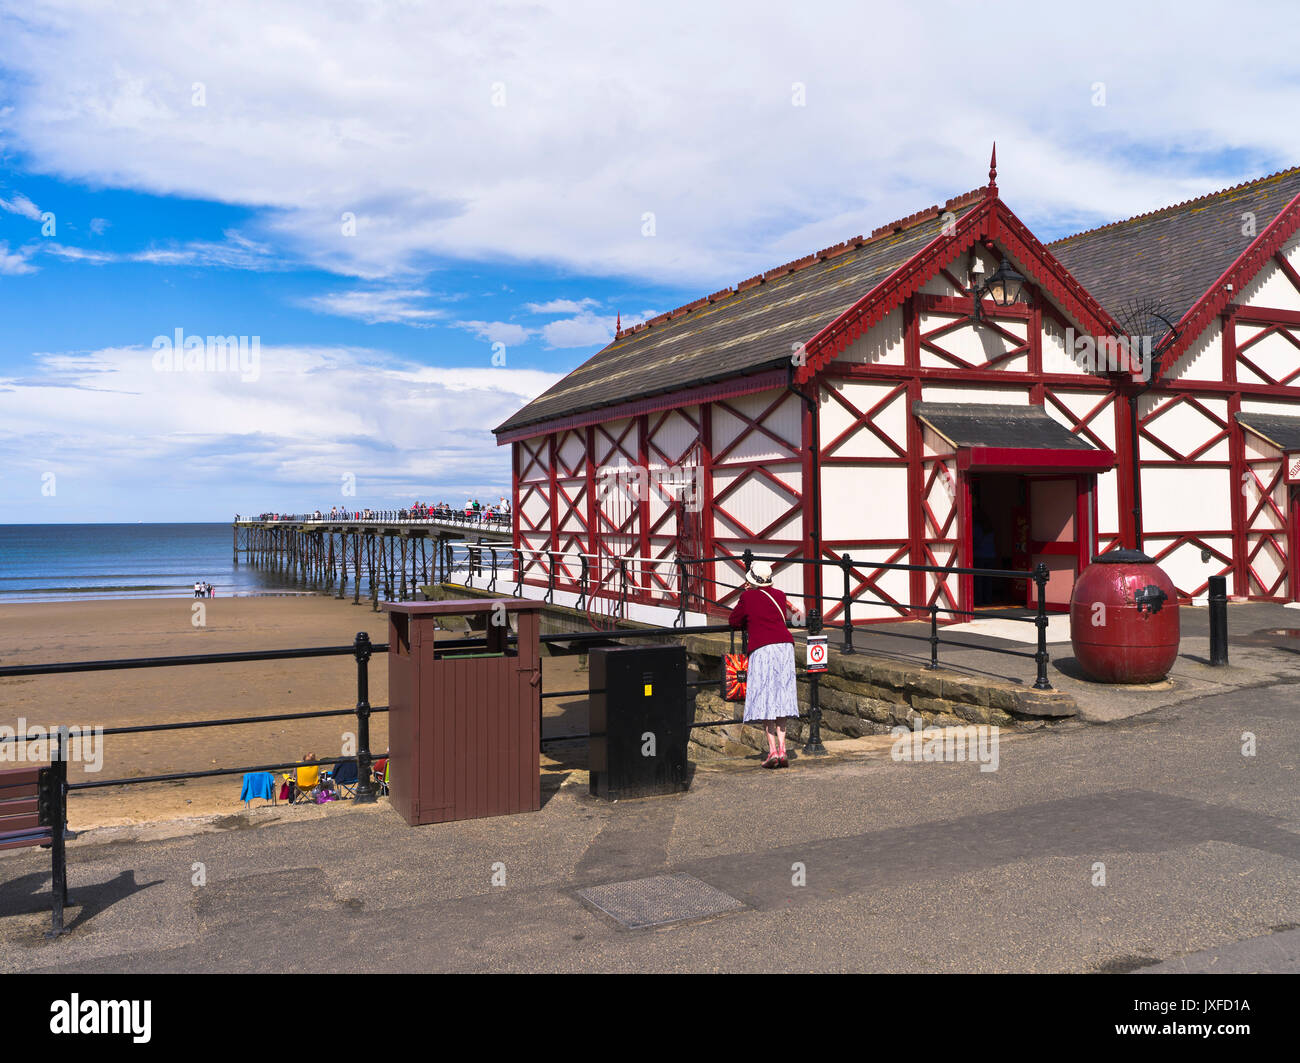 dh Saltburn pier SALTBURN BY THE SEA CLEVELAND ENGLAND Old lady Victorian piers seaside uk resort Stock Photo